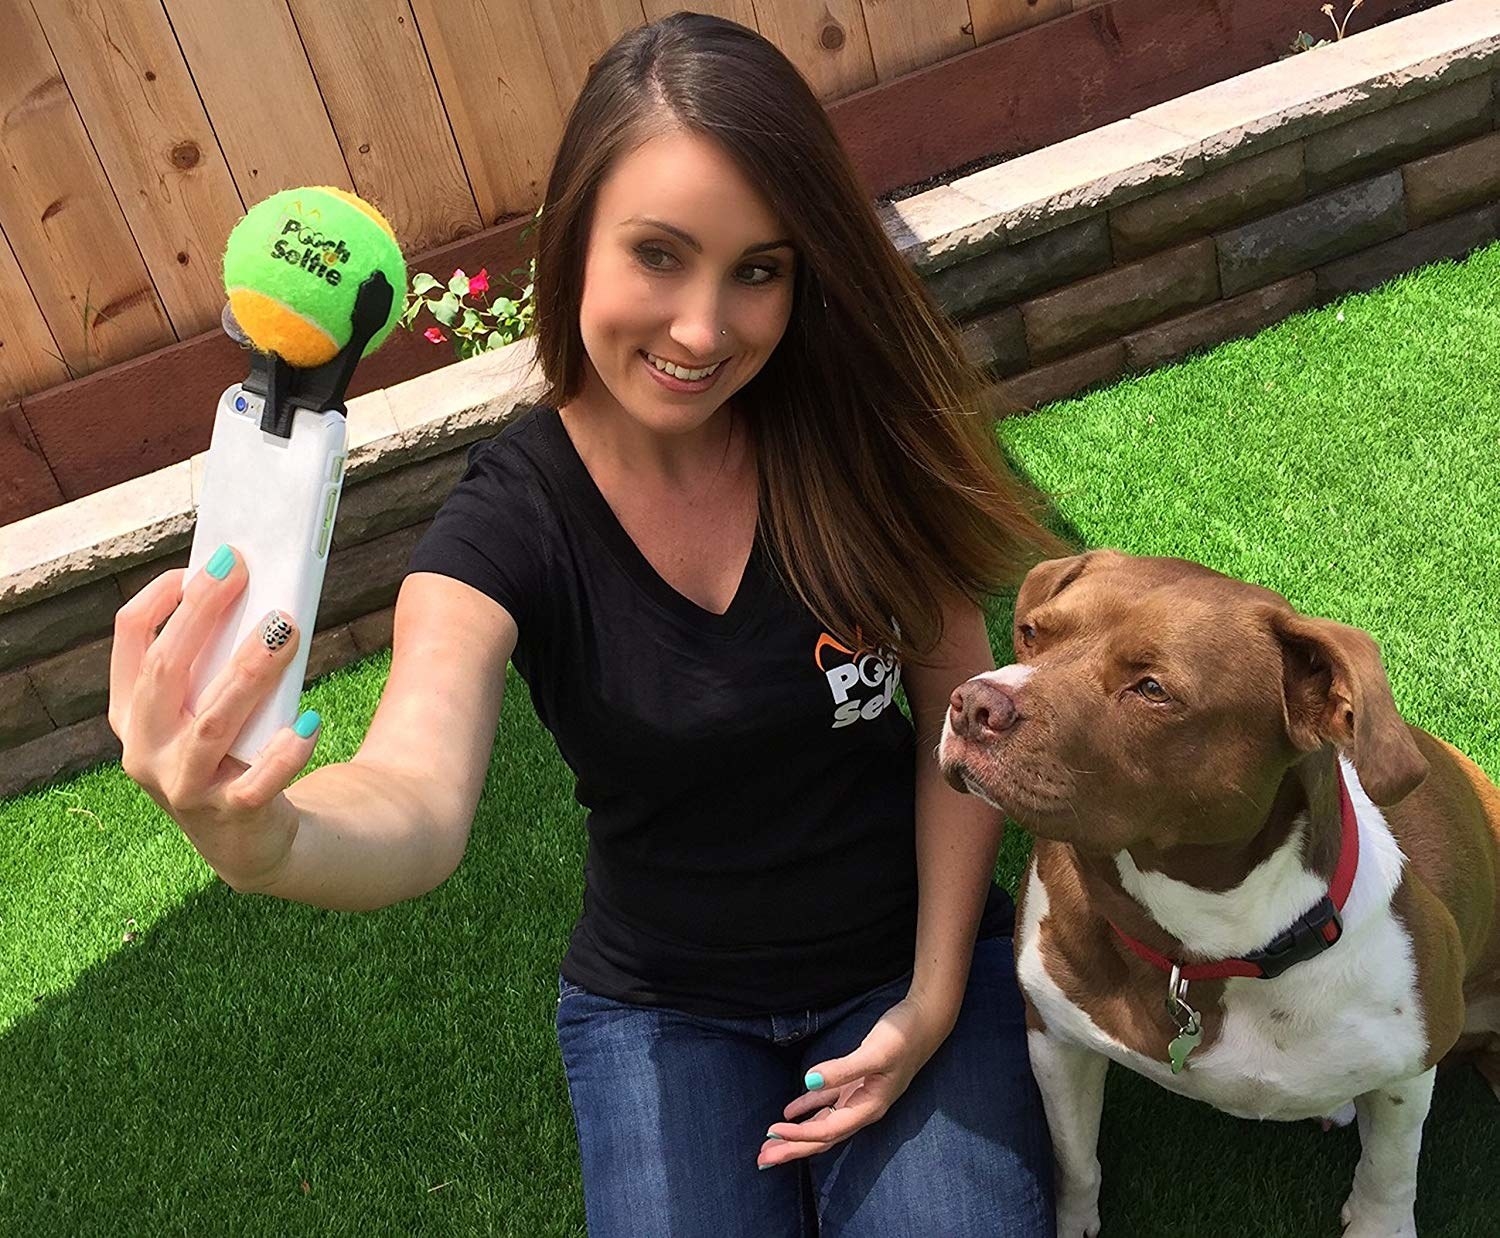 model taking a selfie with a dog